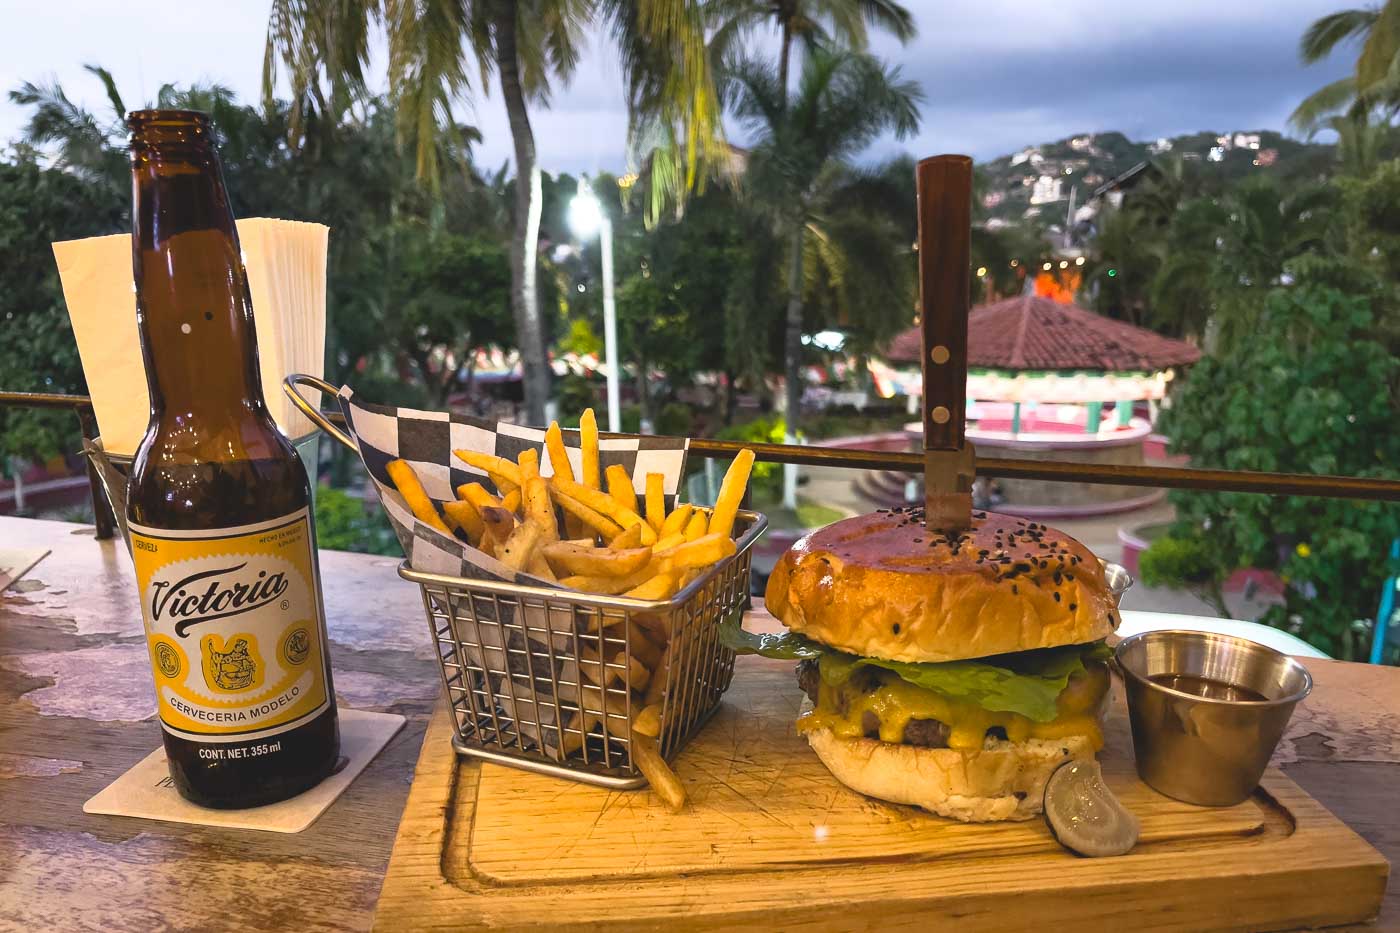 Burger, fries and a beer at Public House with a view of the main plaza of Sayulita.